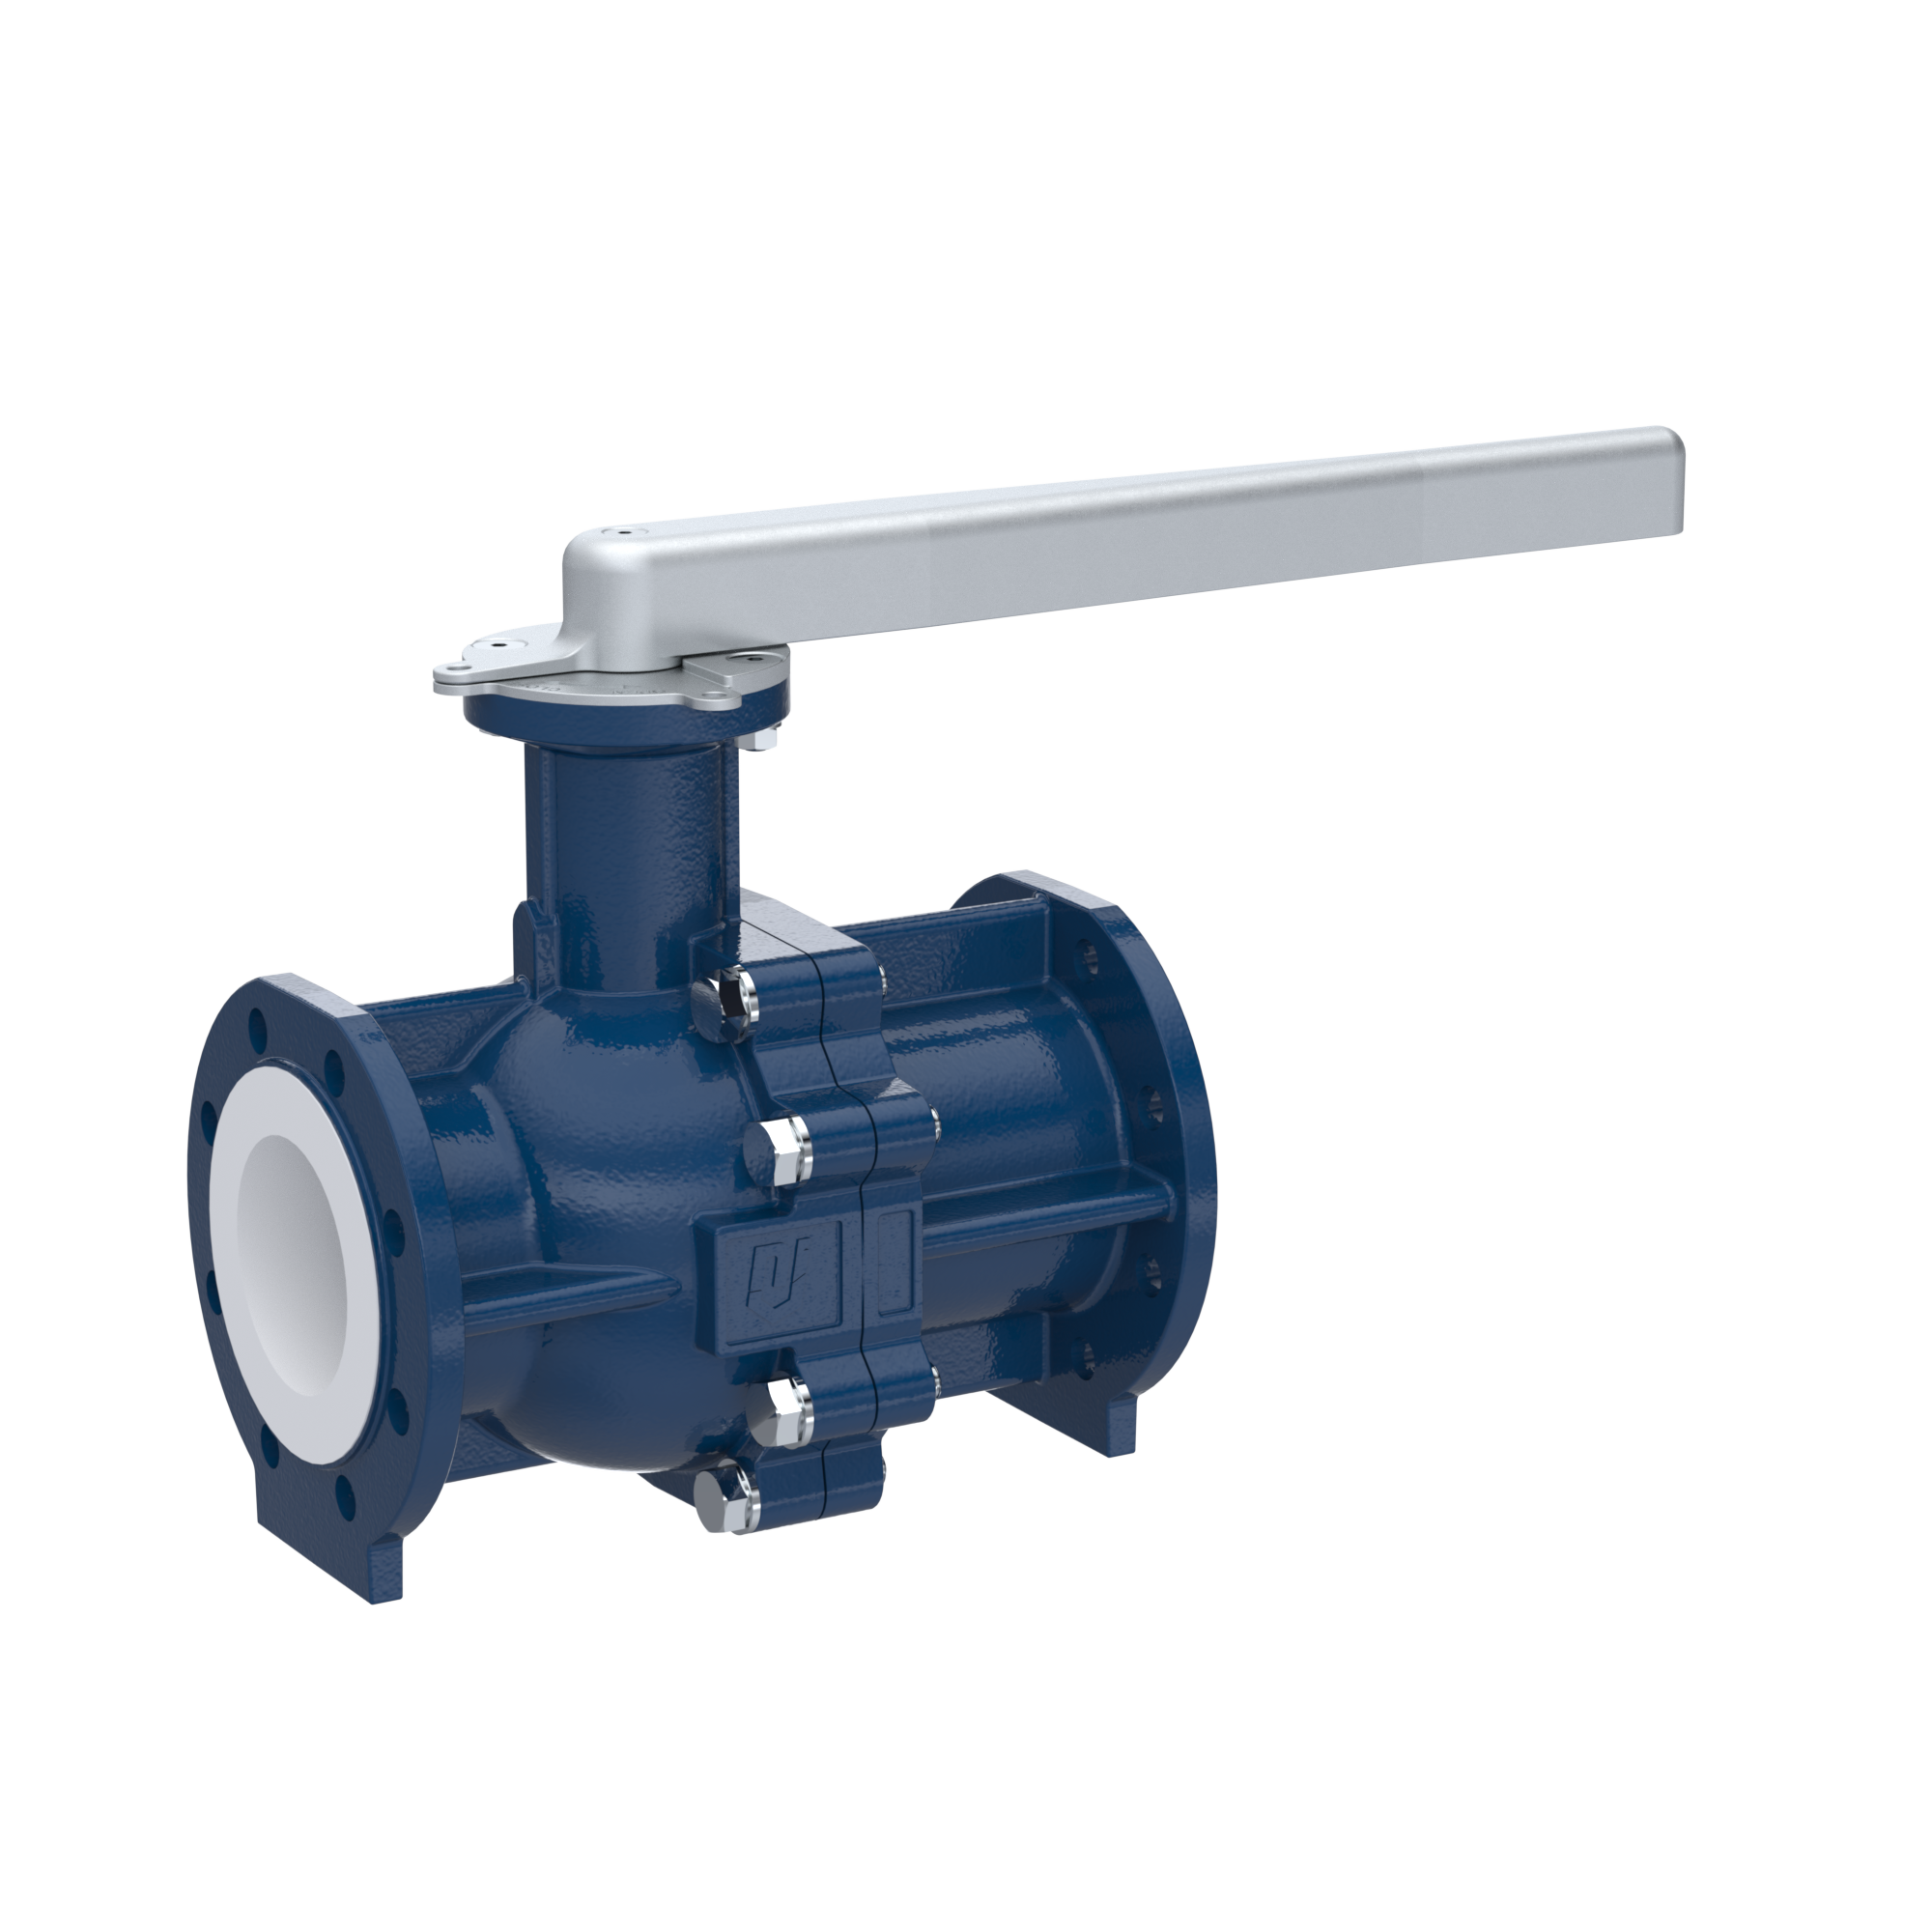 PFA-flange ball valve FK13 DN80 - 3" inch PN10/16 made of spheroidal graphite cast iron with lever hand